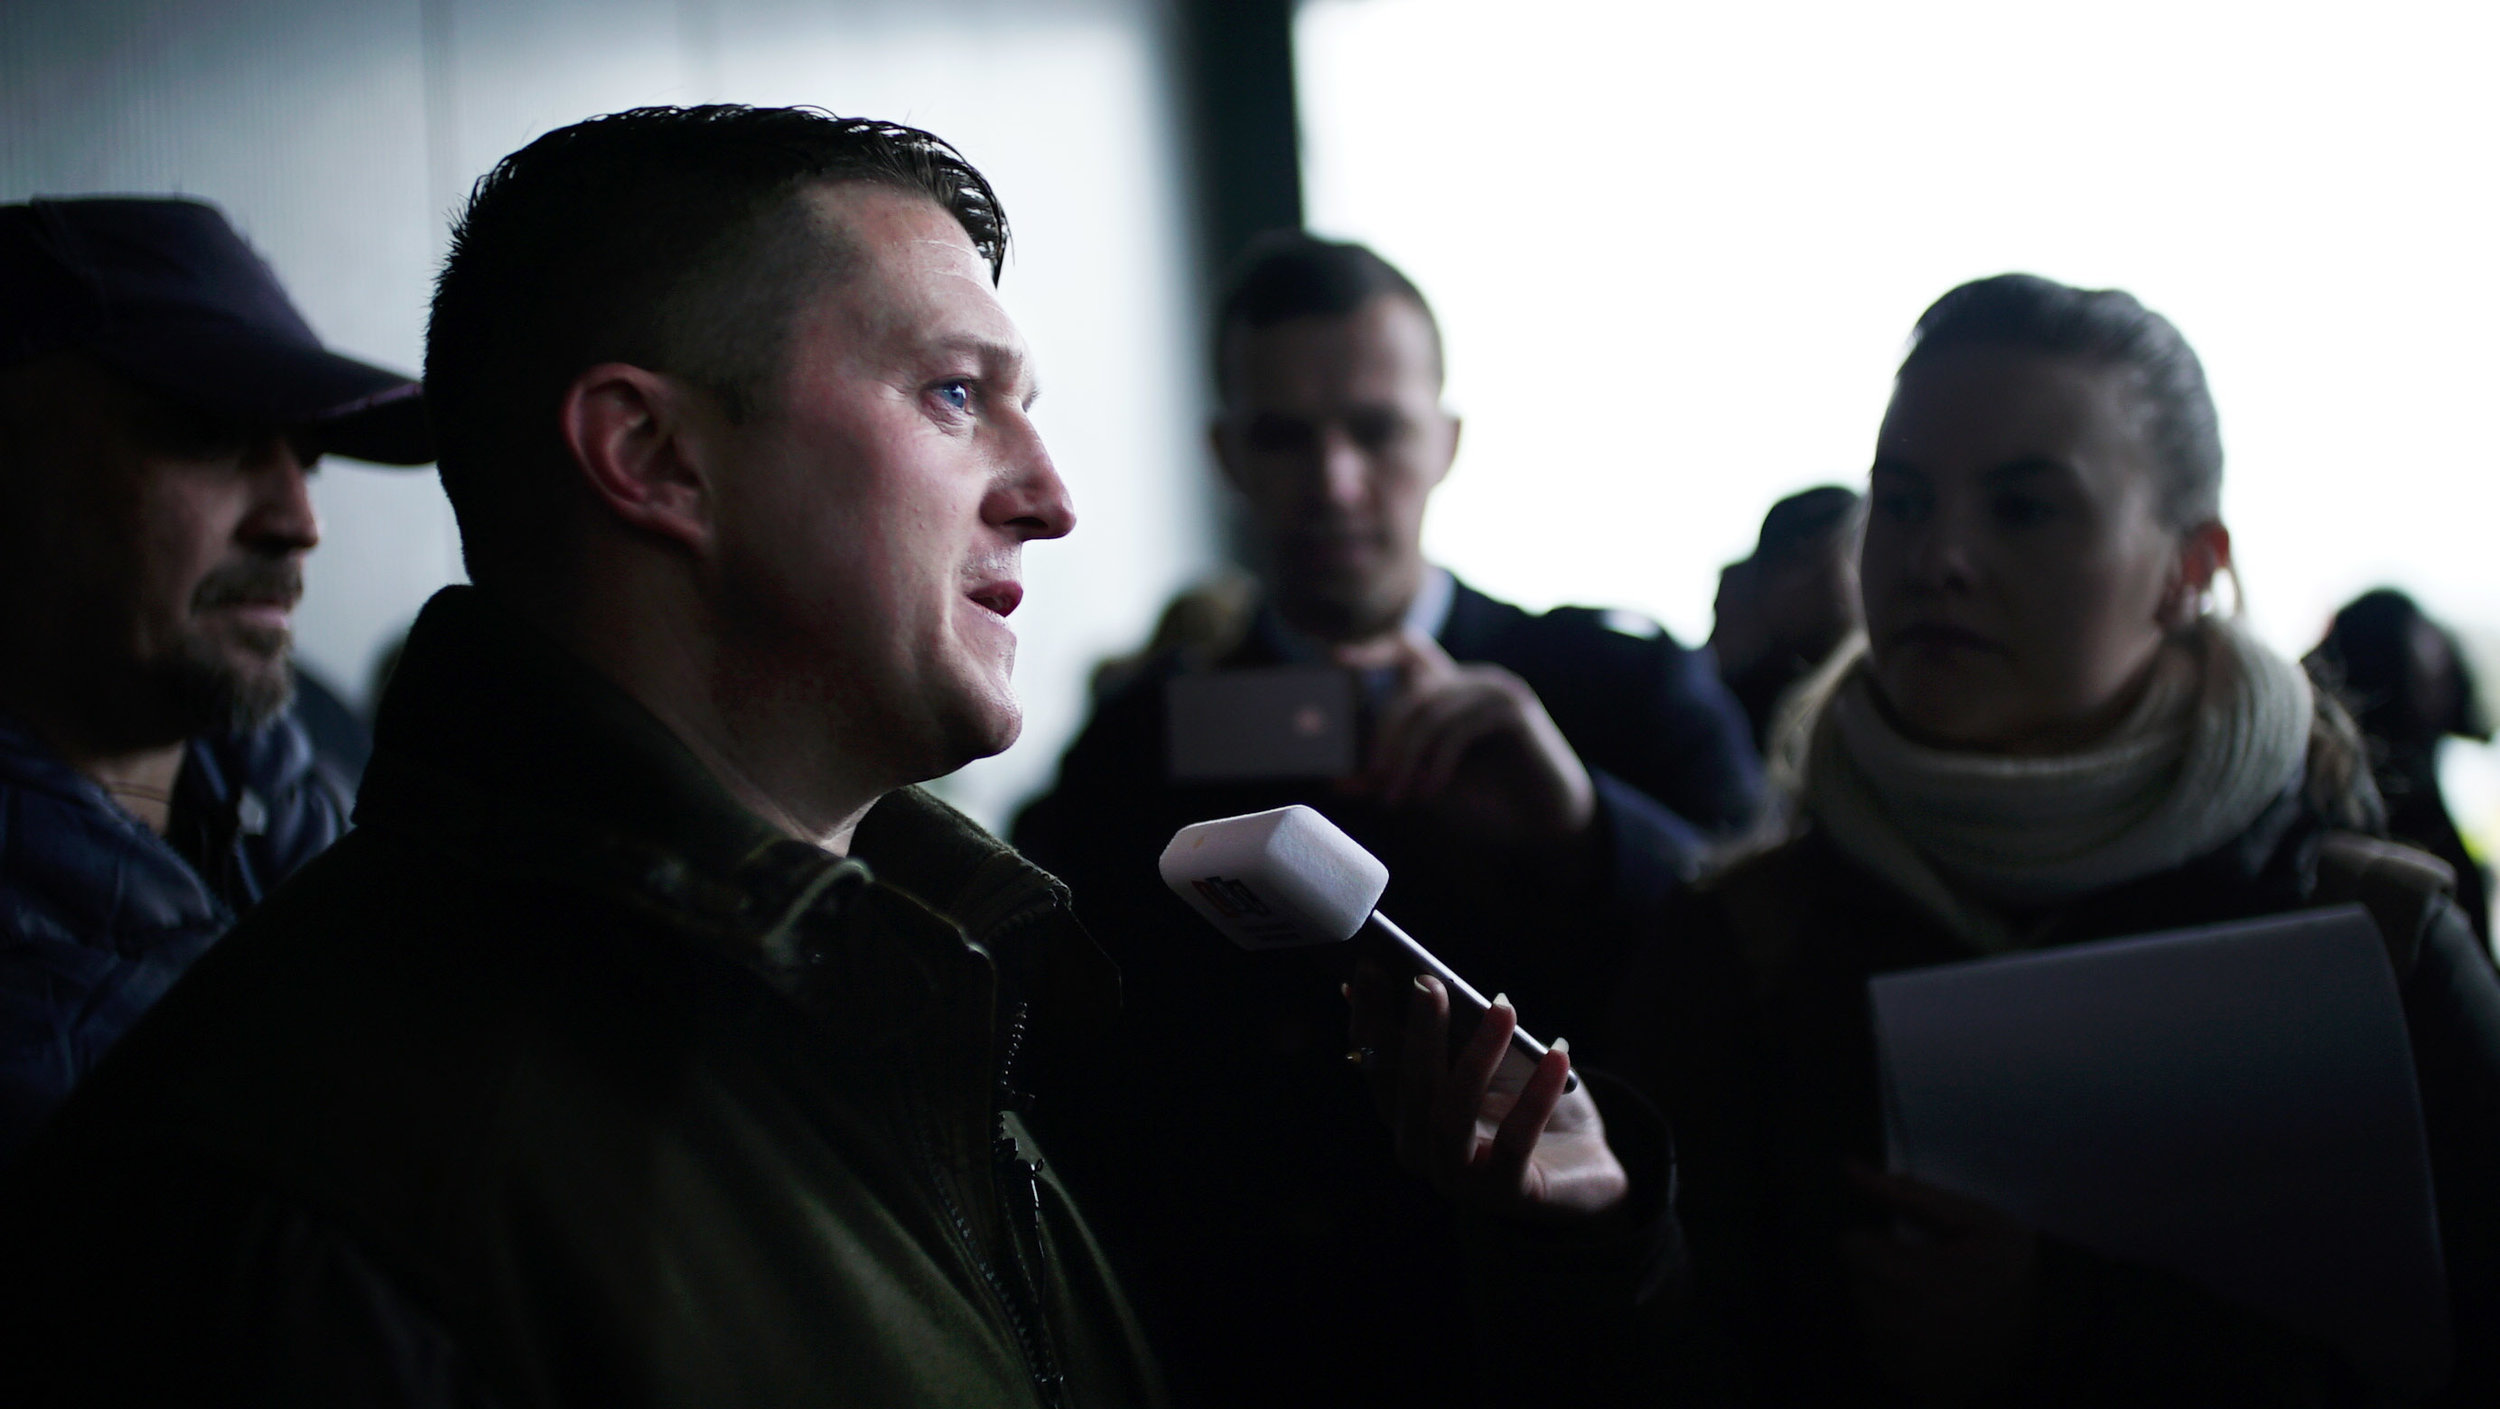  Far-right activist and founder of English Defense League Tommy Robinson during his silent march for PEGIDA, a nationalist group in the UK.  Photo by Sarah McClure  